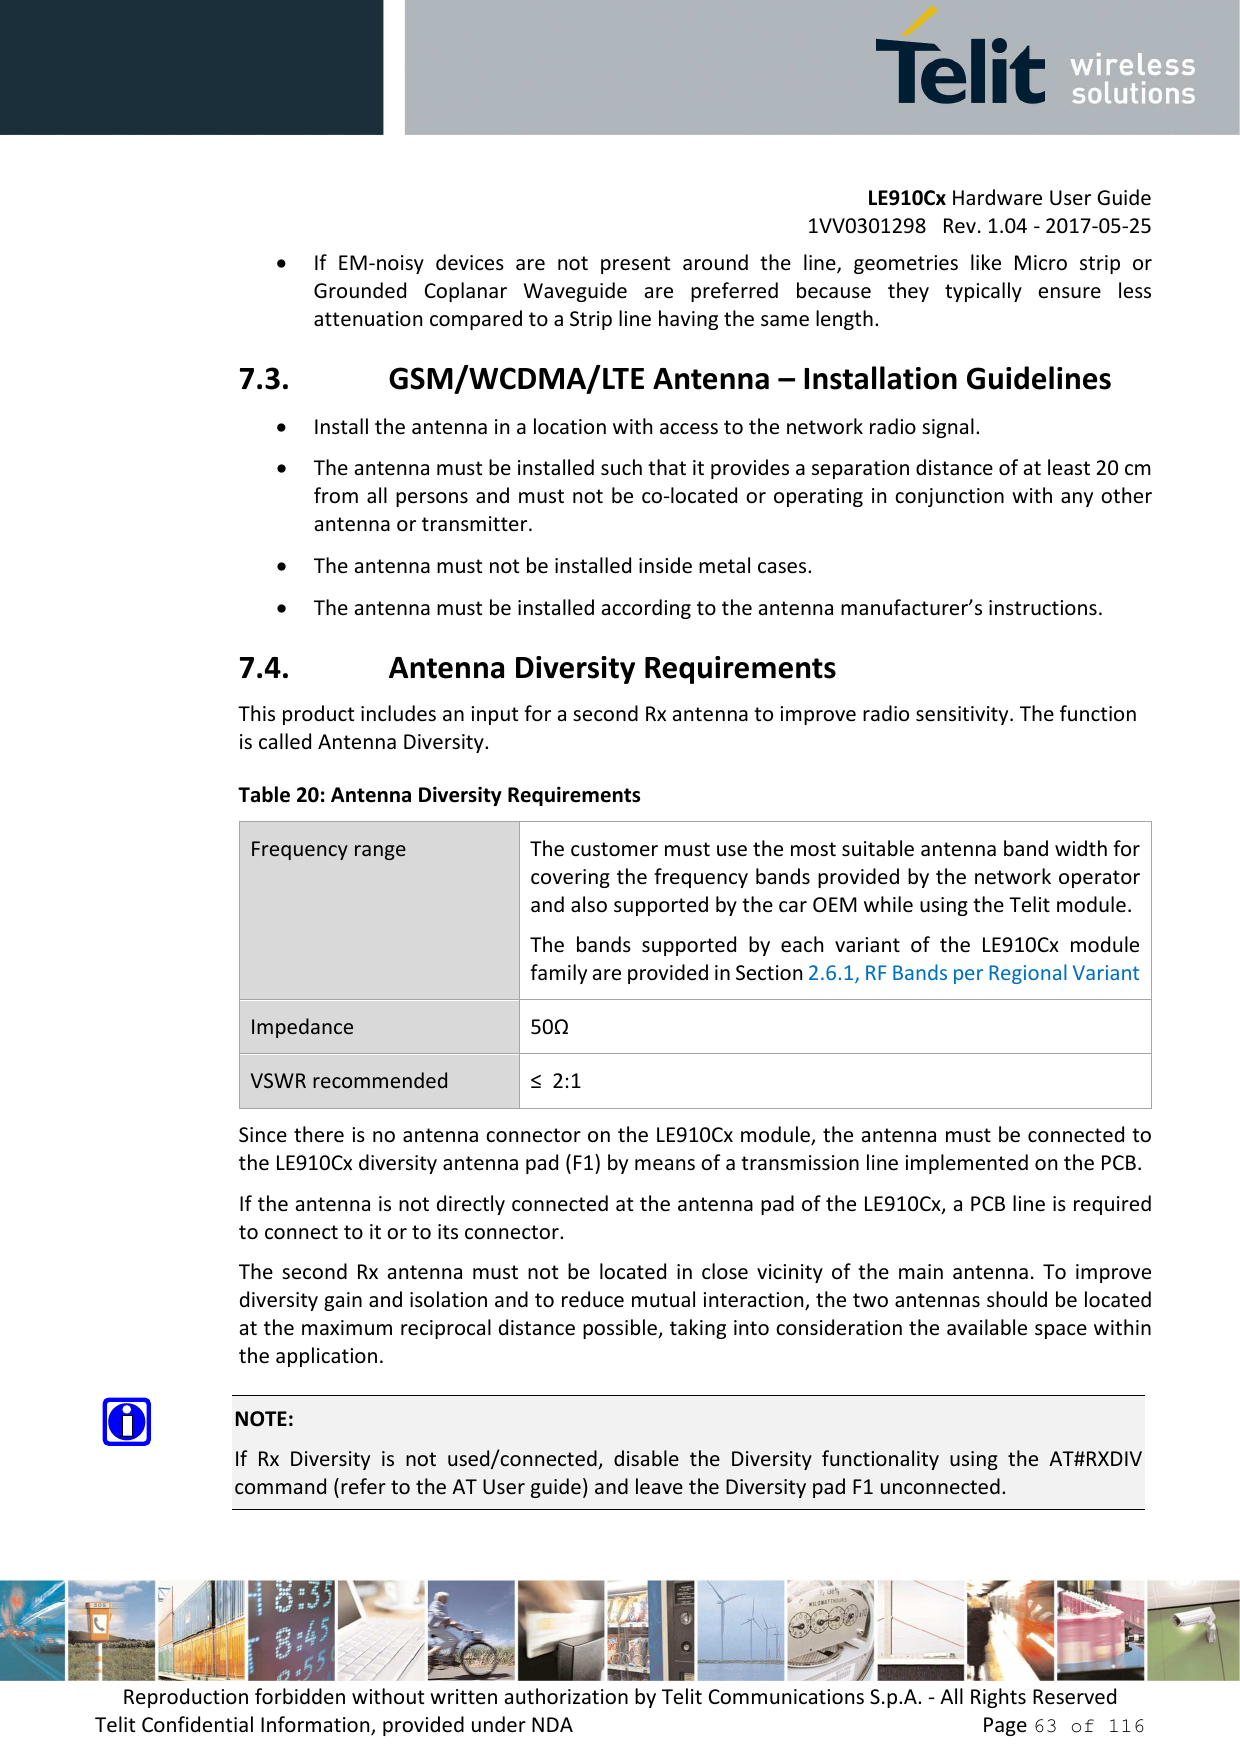         LE910Cx Hardware User Guide 1VV0301298   Rev. 1.04 - 2017-05-25 Reproduction forbidden without written authorization by Telit Communications S.p.A. - All Rights Reserved Telit Confidential Information, provided under NDA                 Page 63 of 116 • If  EM-noisy  devices  are  not  present  around  the  line,  geometries  like  Micro  strip  or Grounded  Coplanar  Waveguide  are  preferred  because  they  typically  ensure  less attenuation compared to a Strip line having the same length. 7.3. GSM/WCDMA/LTE Antenna – Installation Guidelines • Install the antenna in a location with access to the network radio signal. • The antenna must be installed such that it provides a separation distance of at least 20 cm from all persons and must not be co-located or operating in conjunction with any other antenna or transmitter. • The antenna must not be installed inside metal cases.  • The antenna must be installed according to the antenna manufacturer’s instructions. 7.4. Antenna Diversity Requirements This product includes an input for a second Rx antenna to improve radio sensitivity. The function is called Antenna Diversity. Table 20: Antenna Diversity Requirements Frequency range  The customer must use the most suitable antenna band width for covering the frequency bands provided by the network operator and also supported by the car OEM while using the Telit module.  The  bands  supported  by  each  variant  of  the  LE910Cx  module family are provided in Section 2.6.1, RF Bands per Regional Variant Impedance  50Ω VSWR recommended  ≤  2:1 Since there is no antenna connector on the LE910Cx module, the antenna must be connected to the LE910Cx diversity antenna pad (F1) by means of a transmission line implemented on the PCB. If the antenna is not directly connected at the antenna pad of the LE910Cx, a PCB line is required to connect to it or to its connector. The  second Rx  antenna  must  not  be  located  in  close  vicinity  of  the  main  antenna.  To  improve diversity gain and isolation and to reduce mutual interaction, the two antennas should be located at the maximum reciprocal distance possible, taking into consideration the available space within the application.  NOTE: If  Rx  Diversity  is  not  used/connected,  disable  the  Diversity  functionality  using  the  AT#RXDIV command (refer to the AT User guide) and leave the Diversity pad F1 unconnected. 